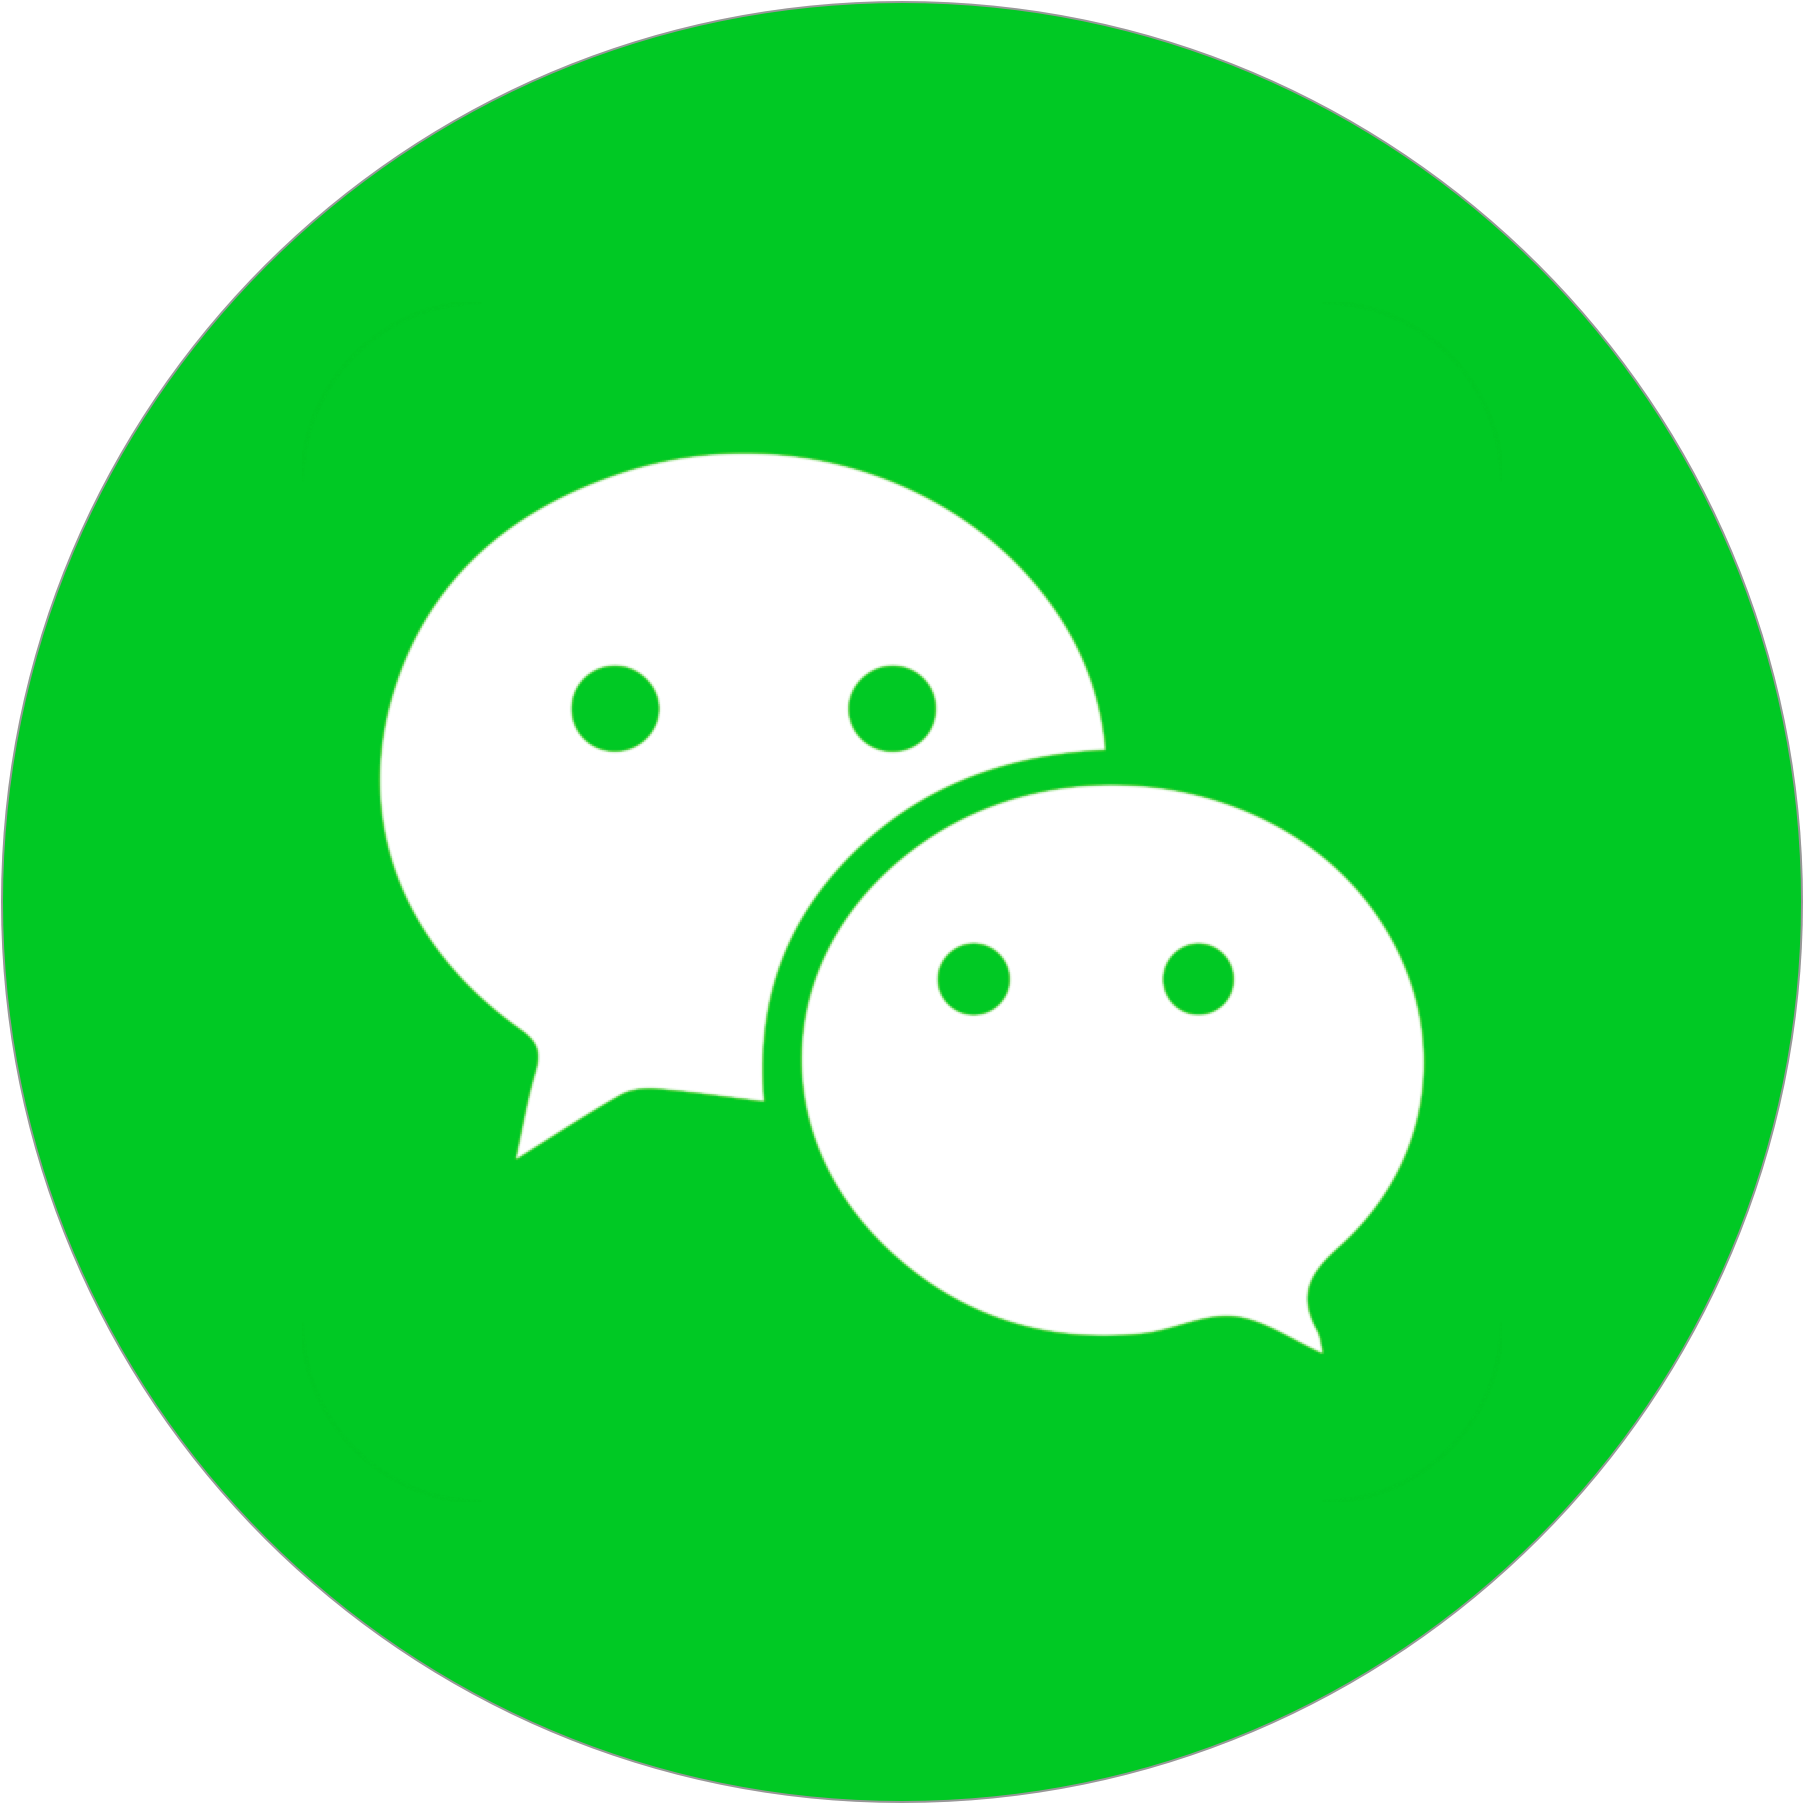 Wechat Logo - WeChat Share Button: How to Add to Your Website - ShareThis